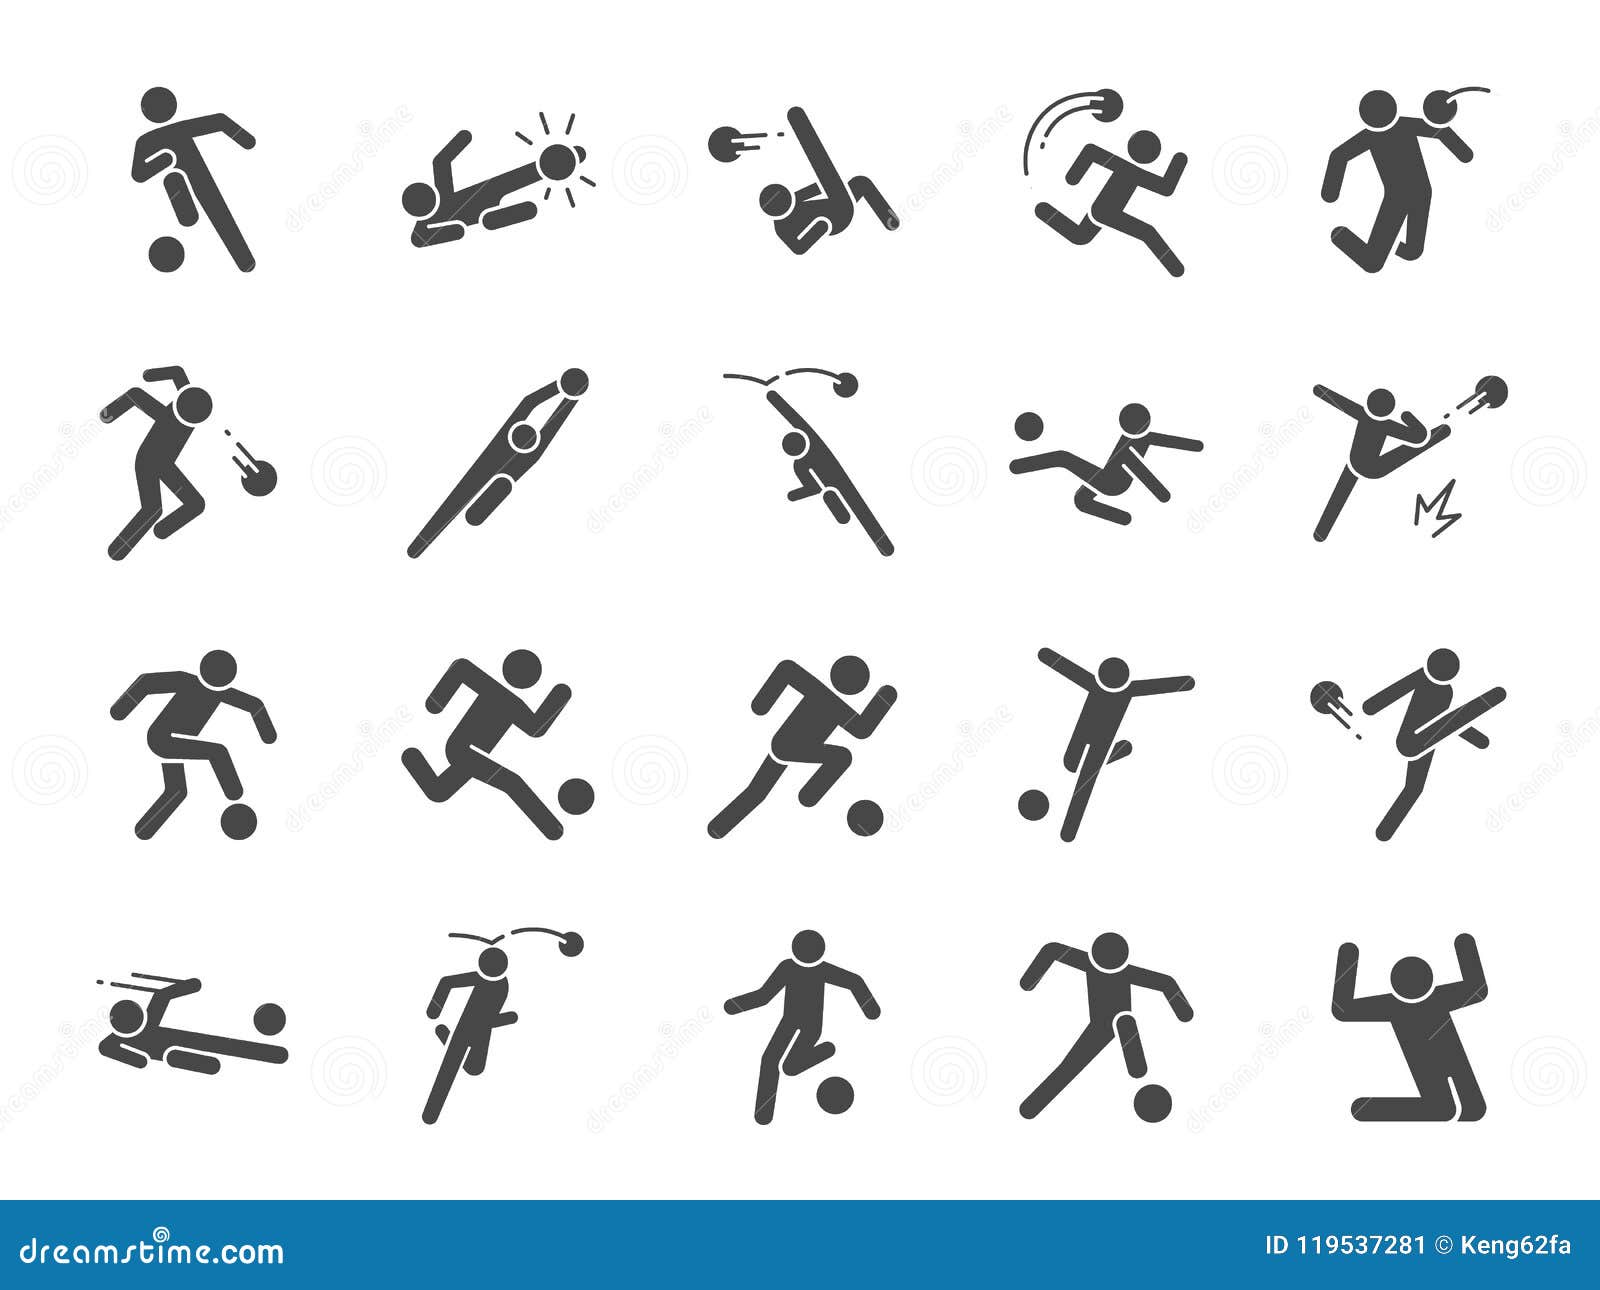 soccer in actions icon set. included icons as football player, goalkeeper, dribble, overhead kick, volley kick, shoot and more.